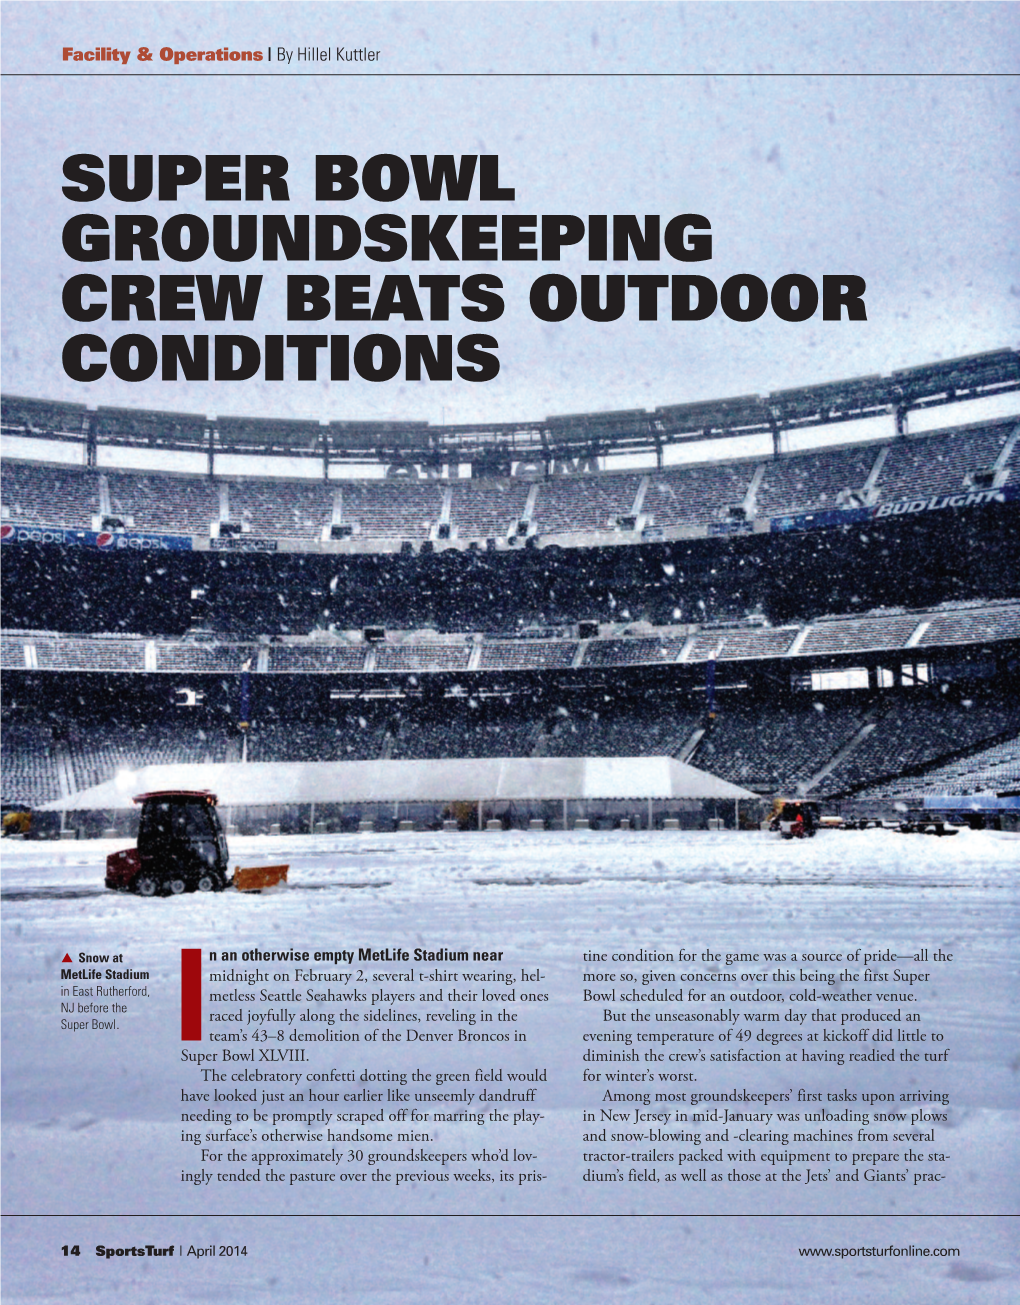 Super Bowl Groundskeeping Crew Beats Outdoor Conditions